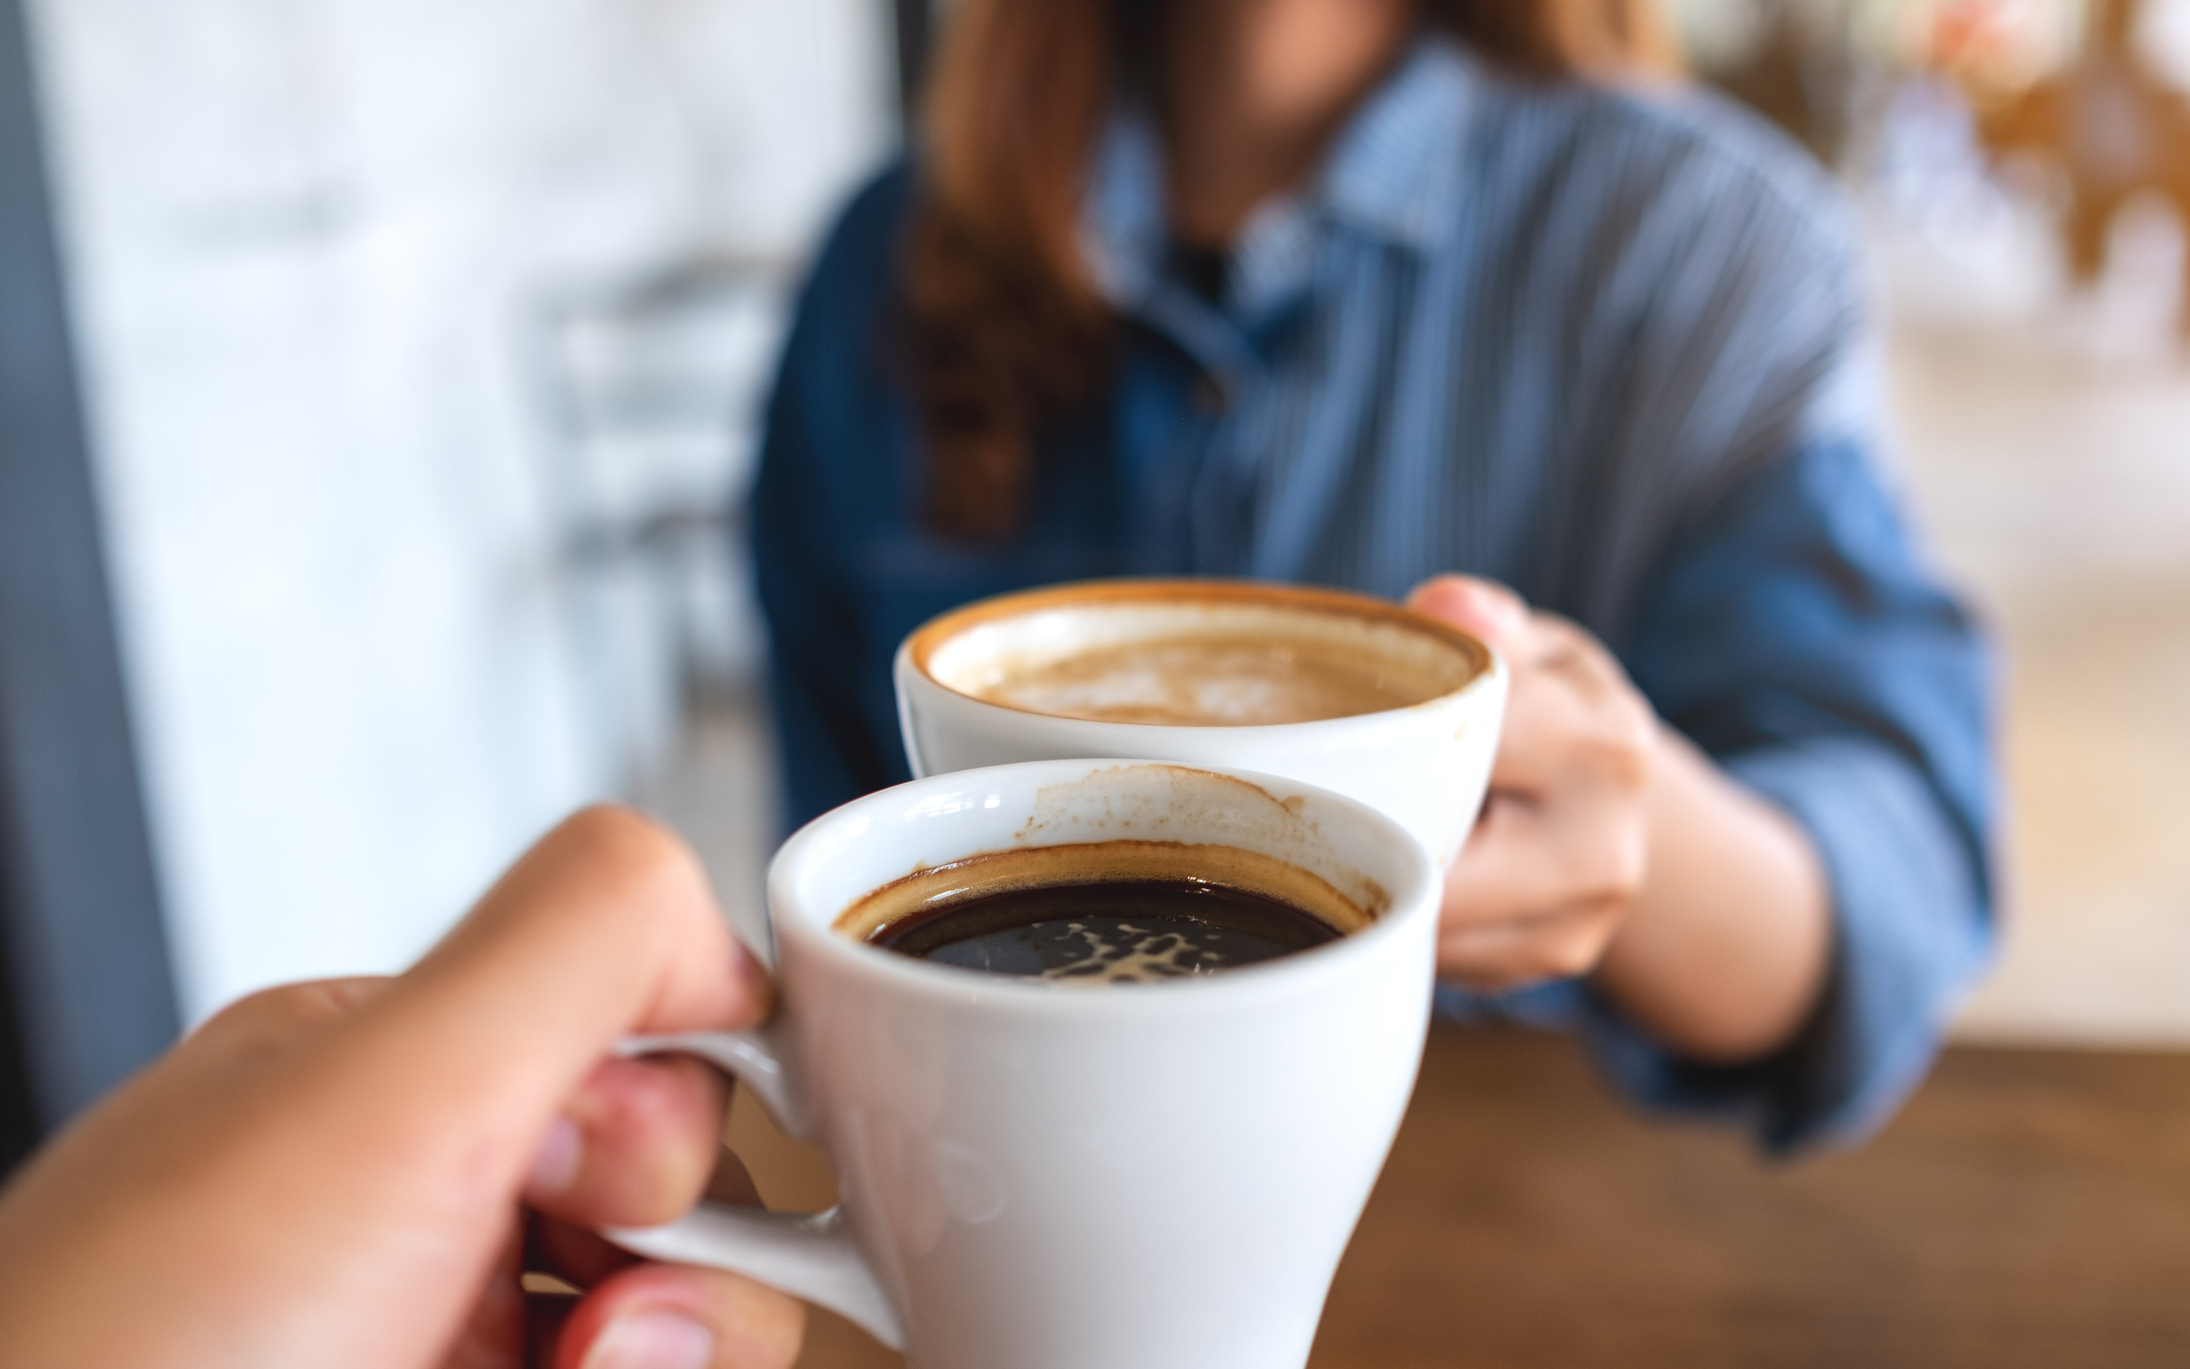 The cholesterol-busting power of caffeine